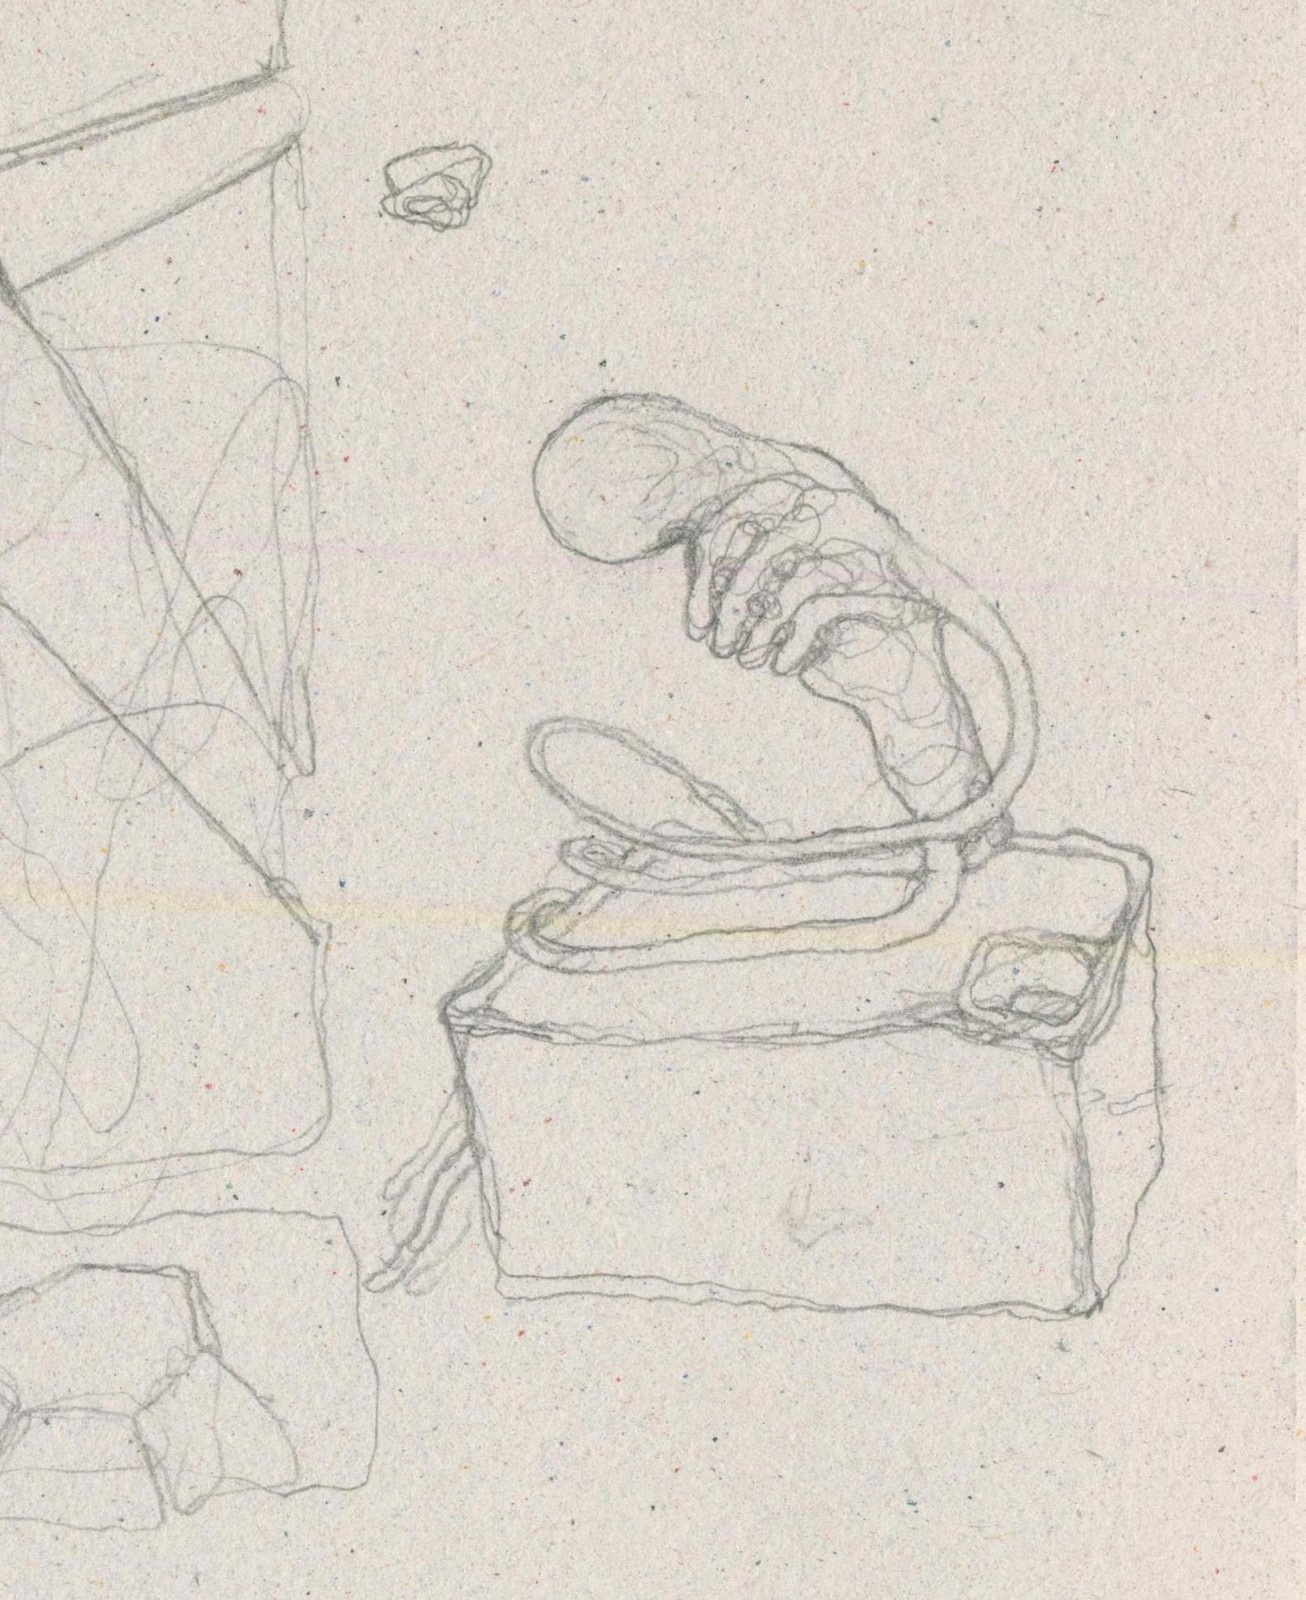 Sketchbook thumnail. Here the creature was sitting on something vaguely looking like a canister. That's where the "tar" part of the title originated.